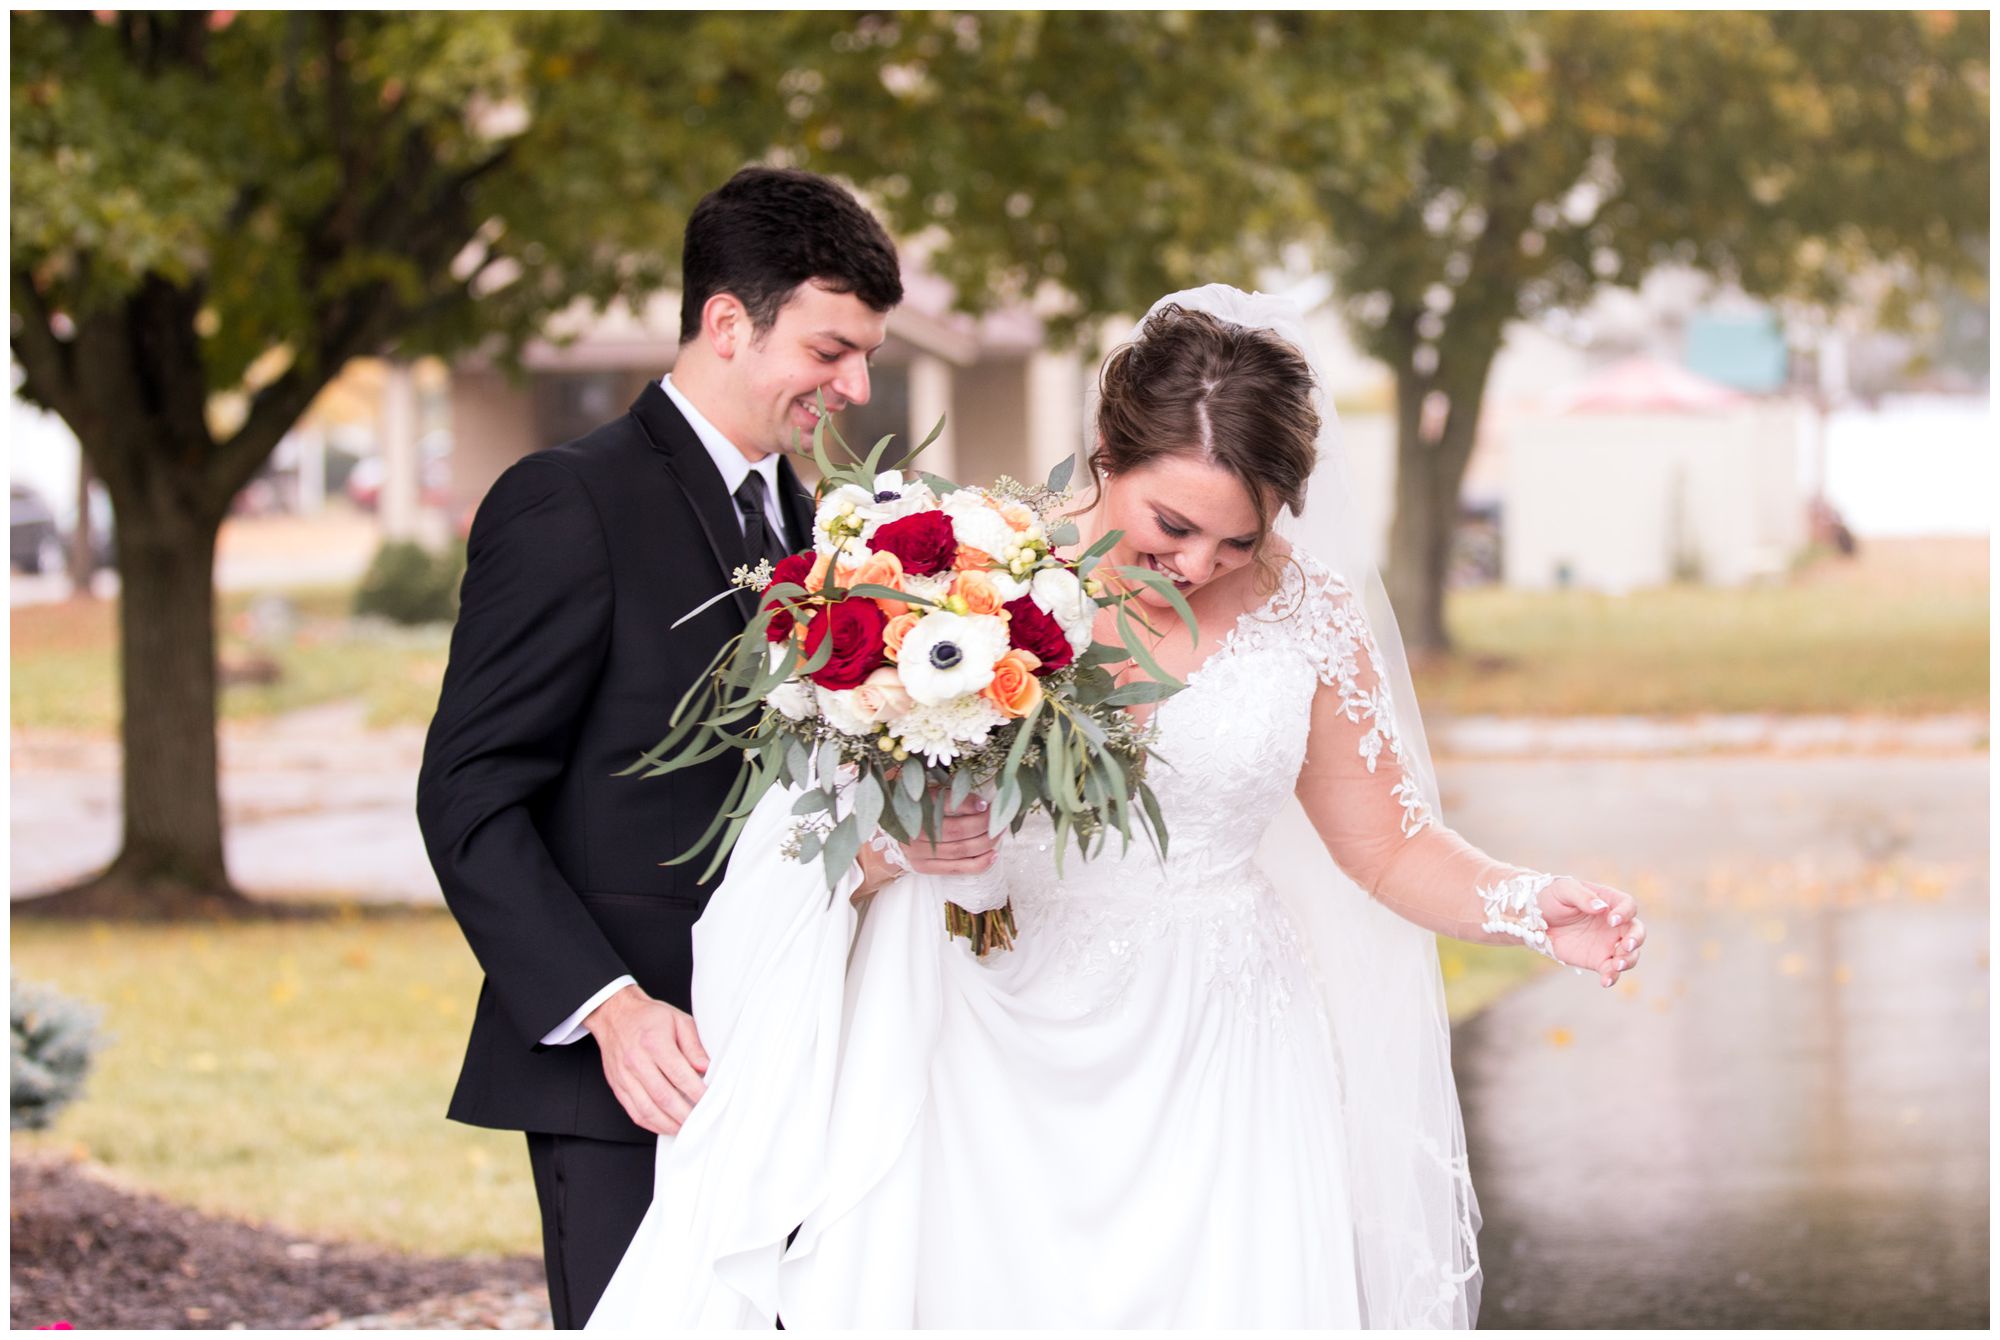 bride and groom portraits at Zion Lutheran Church in Decatur, Indiana